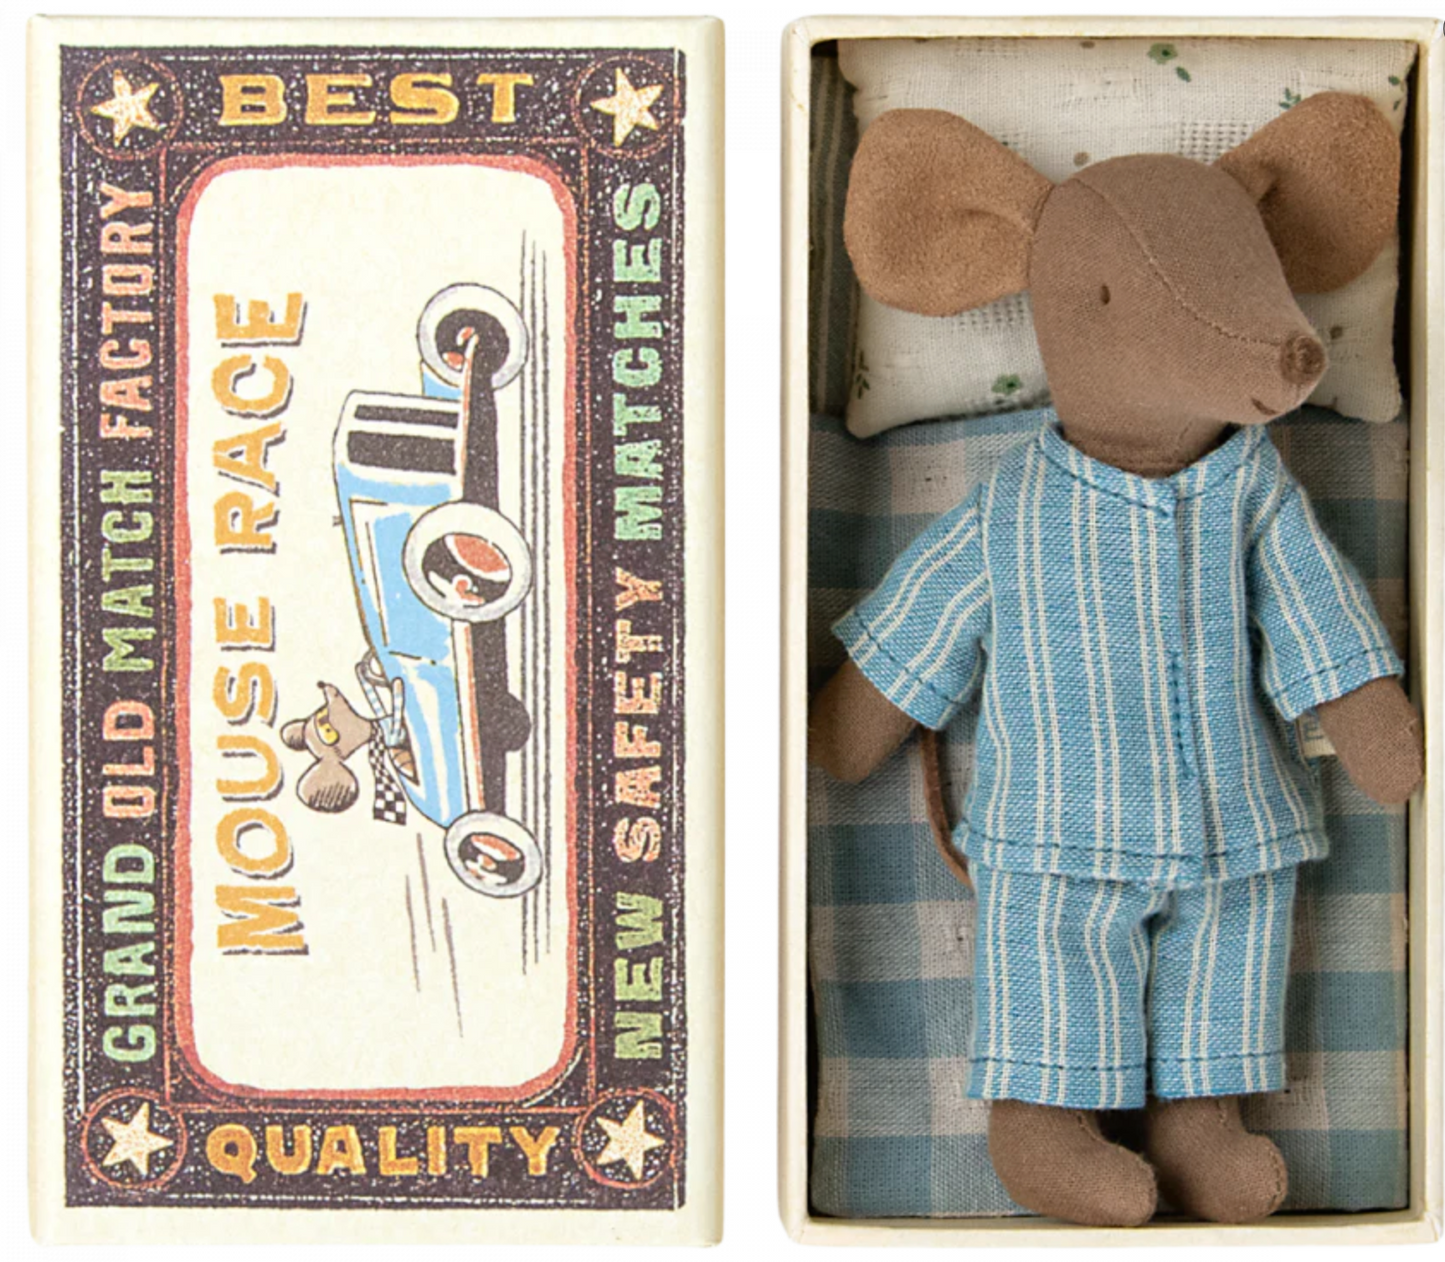 Big Brother Mouse in Matchbook- brown mouse